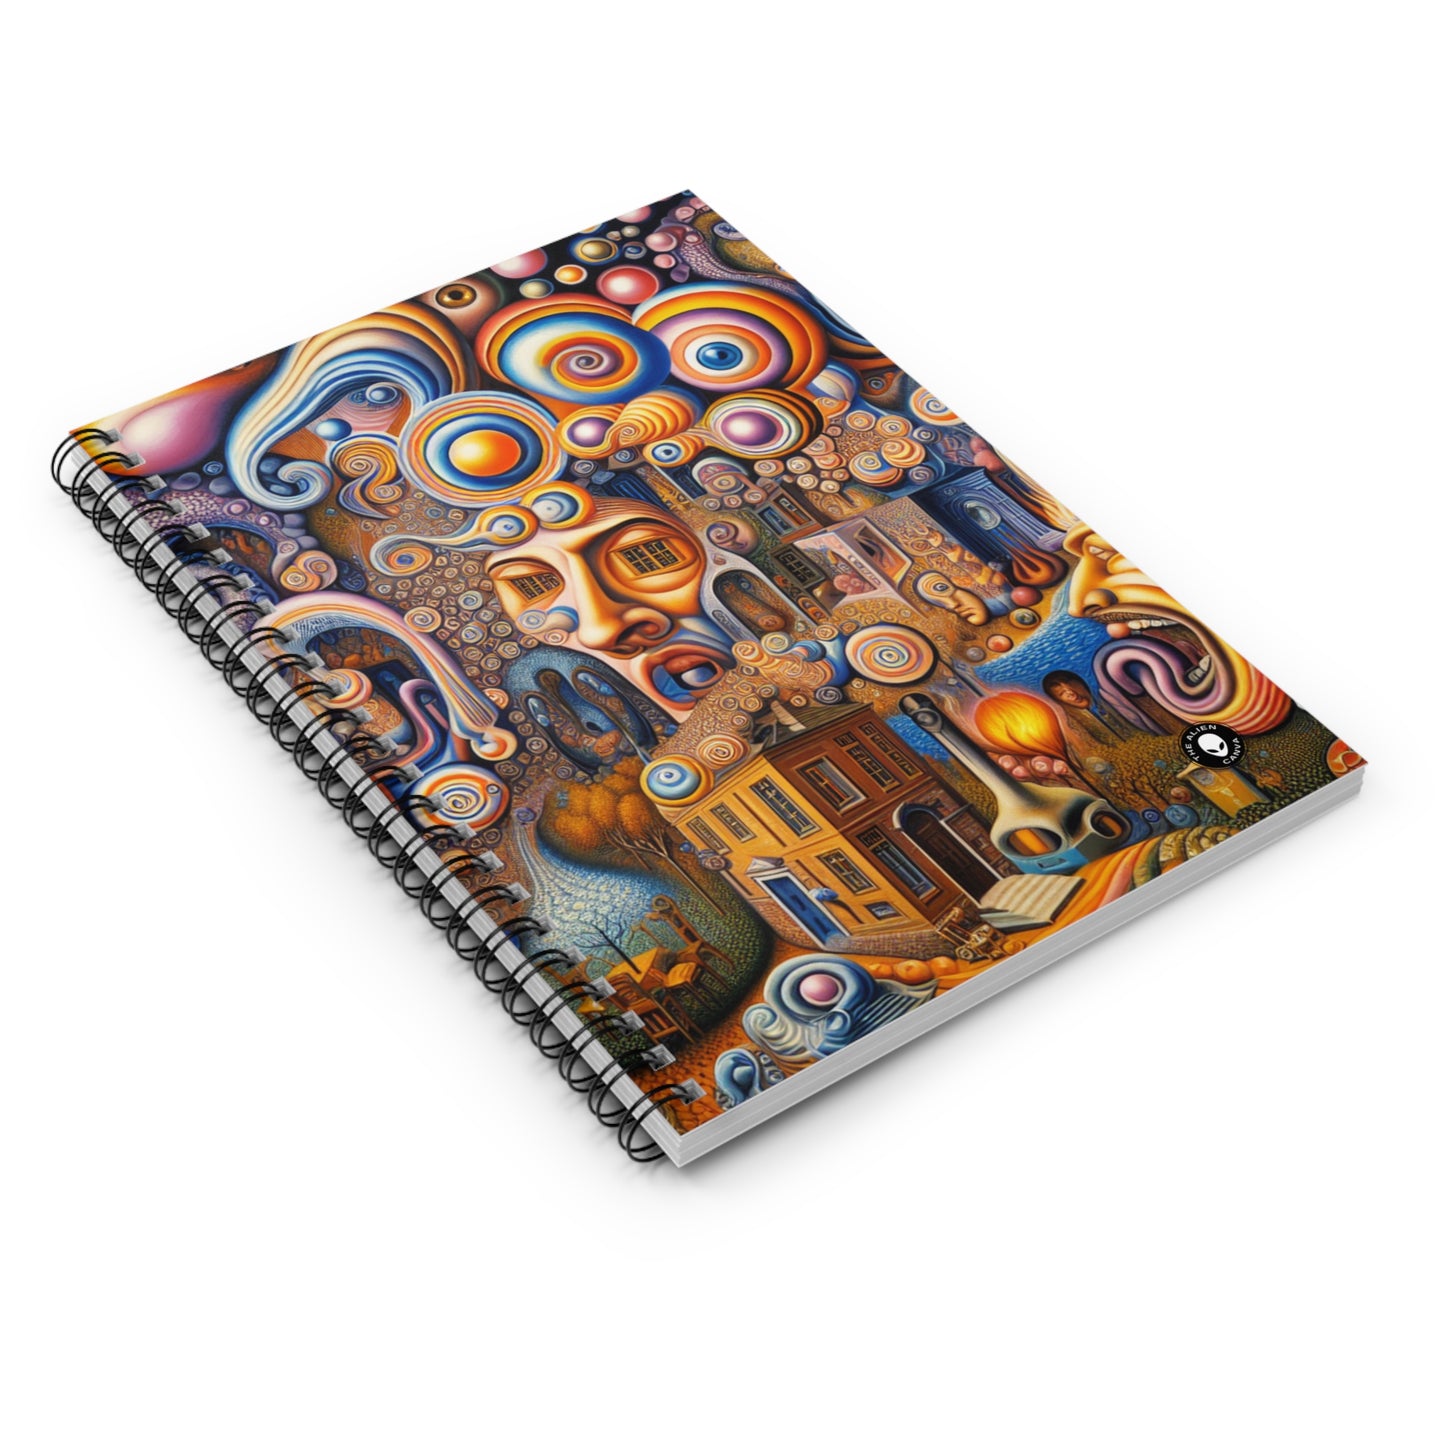 "Melted Time: A Whimsical Dance of Dreams" - The Alien Spiral Notebook (Ruled Line) Surrealism